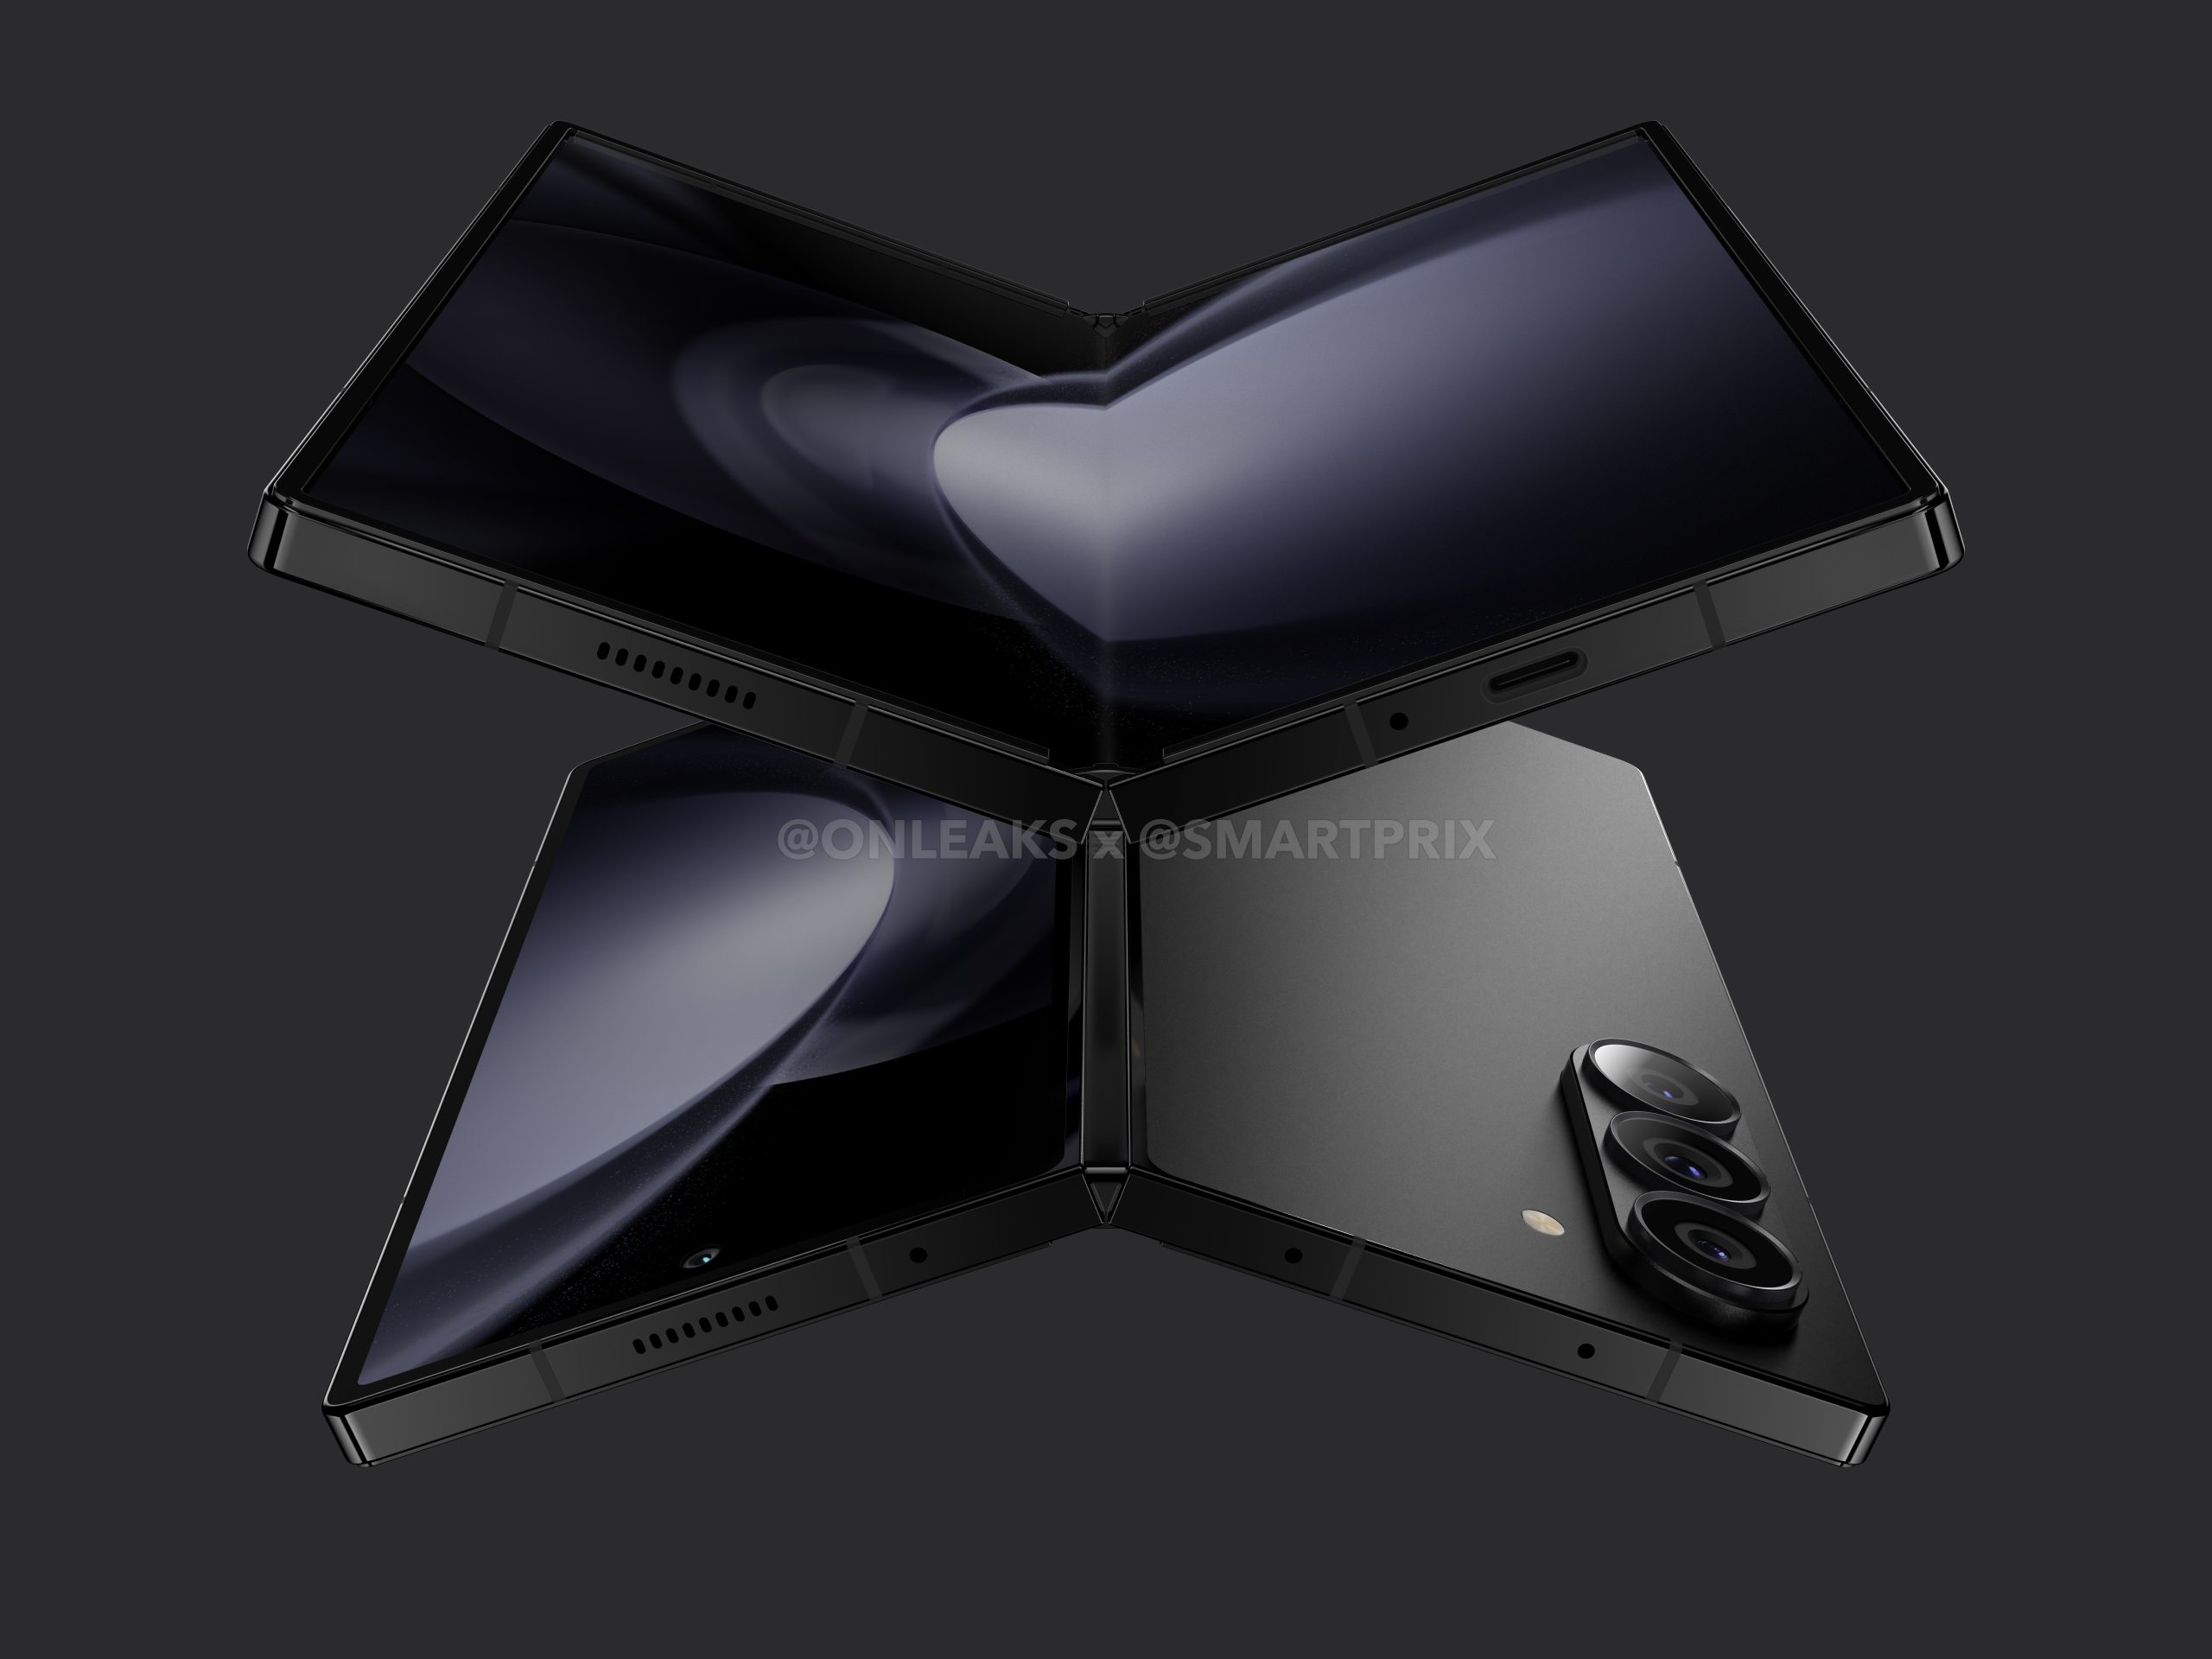 An insider has revealed what Samsung's foldable Galaxy Fold 6 smartphone will look like